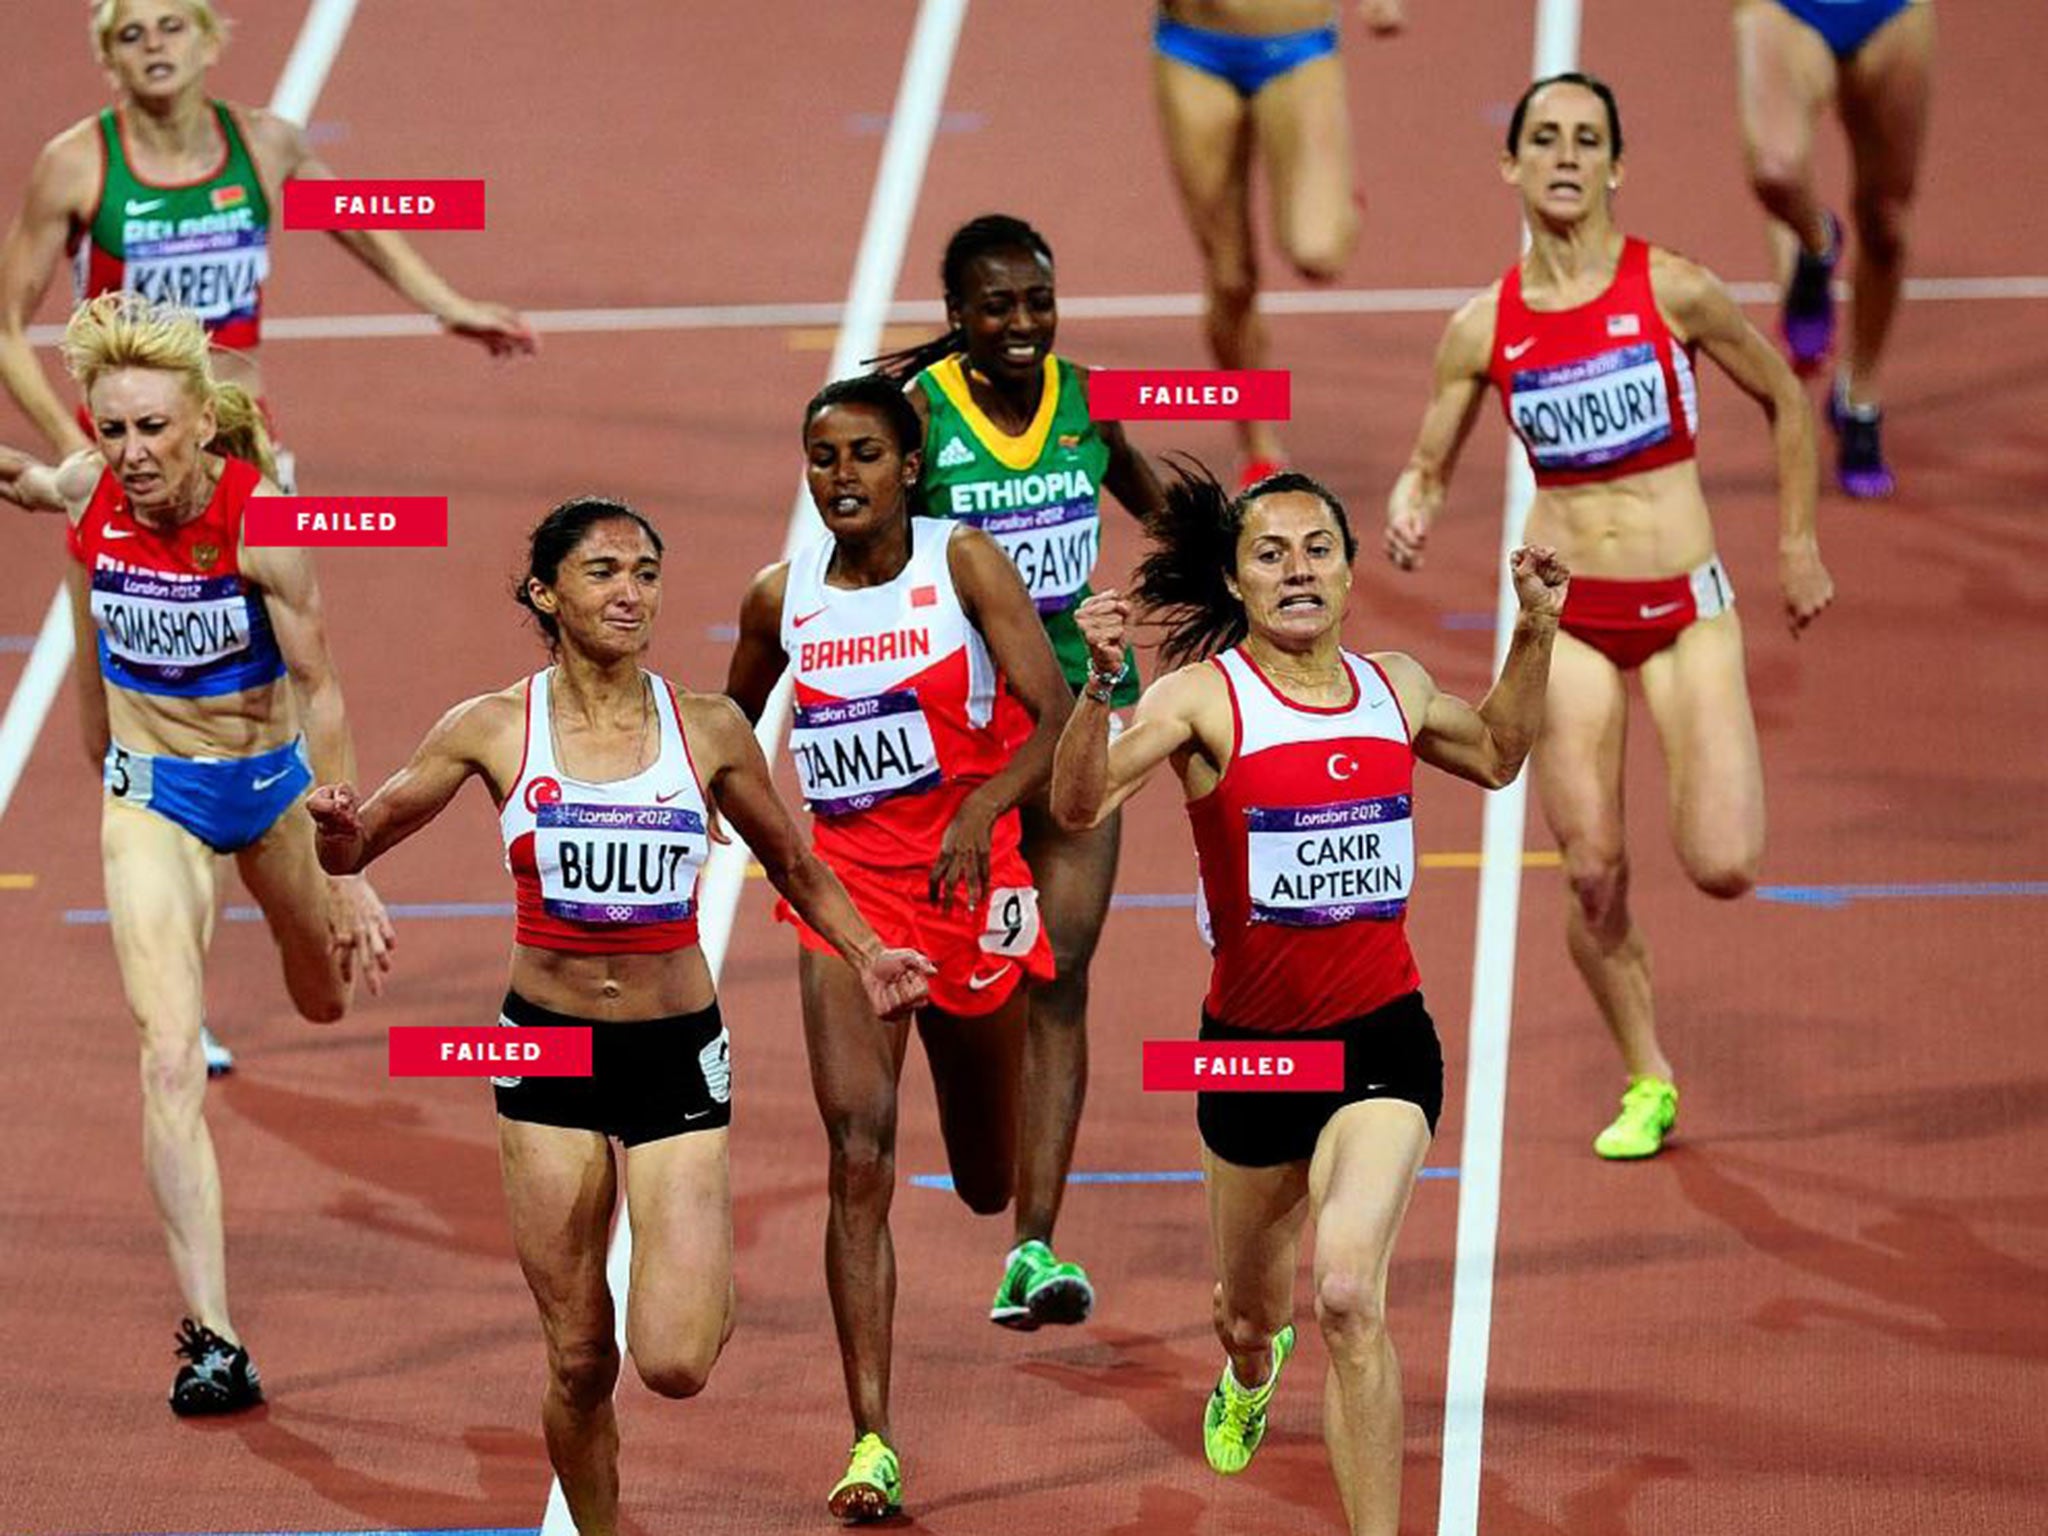 The athletes who sullied the London 2012 final